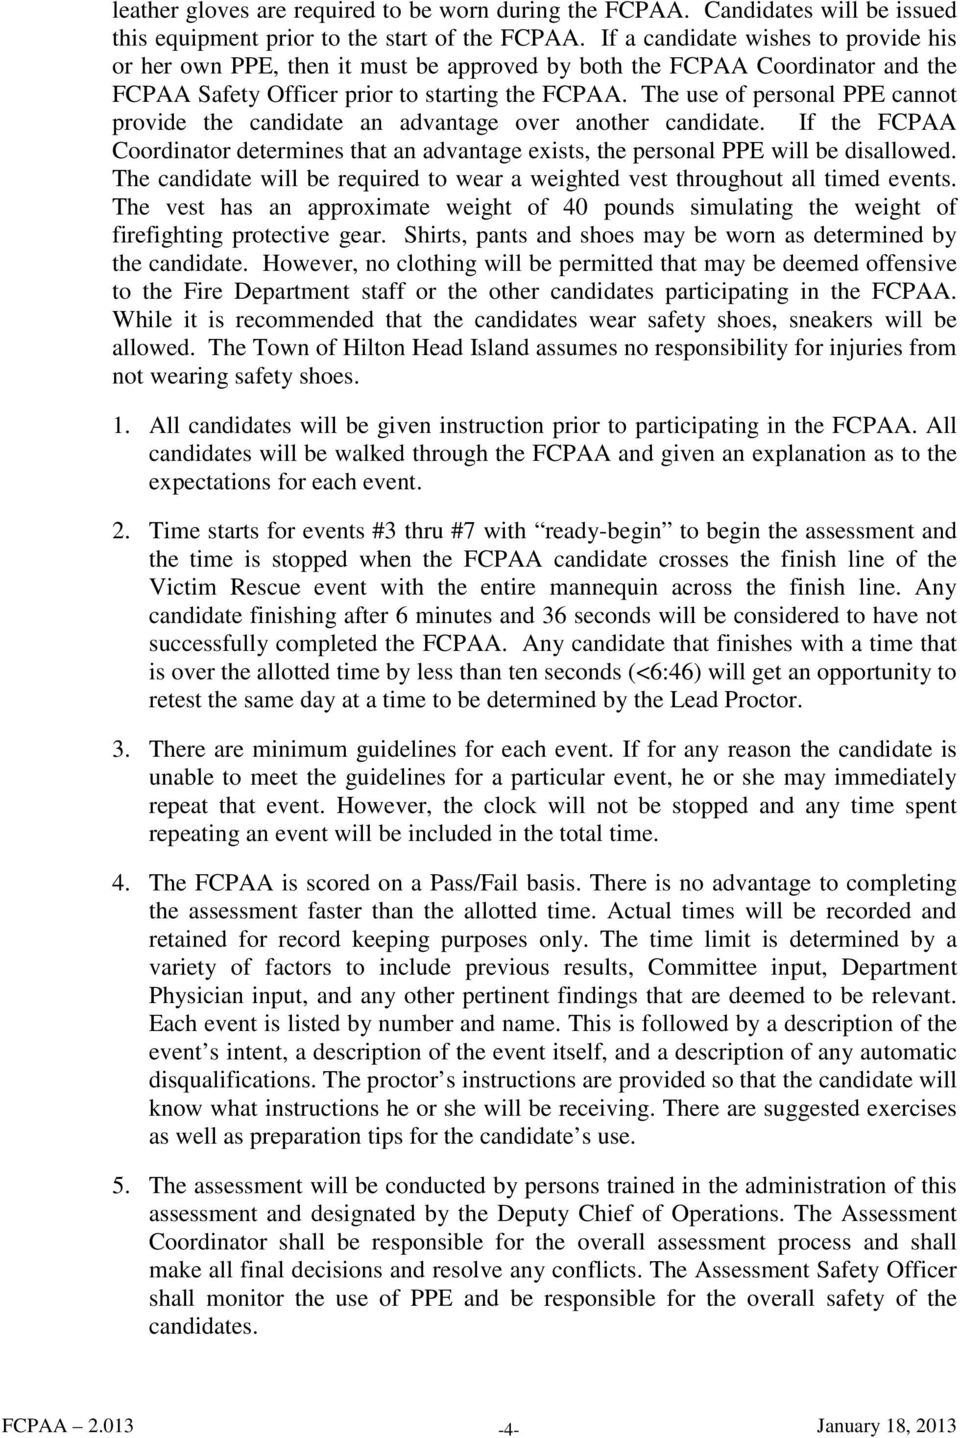 The use of personal PPE cannot provide the candidate an advantage over another candidate. If the FCPAA Coordinator determines that an advantage exists, the personal PPE will be disallowed.